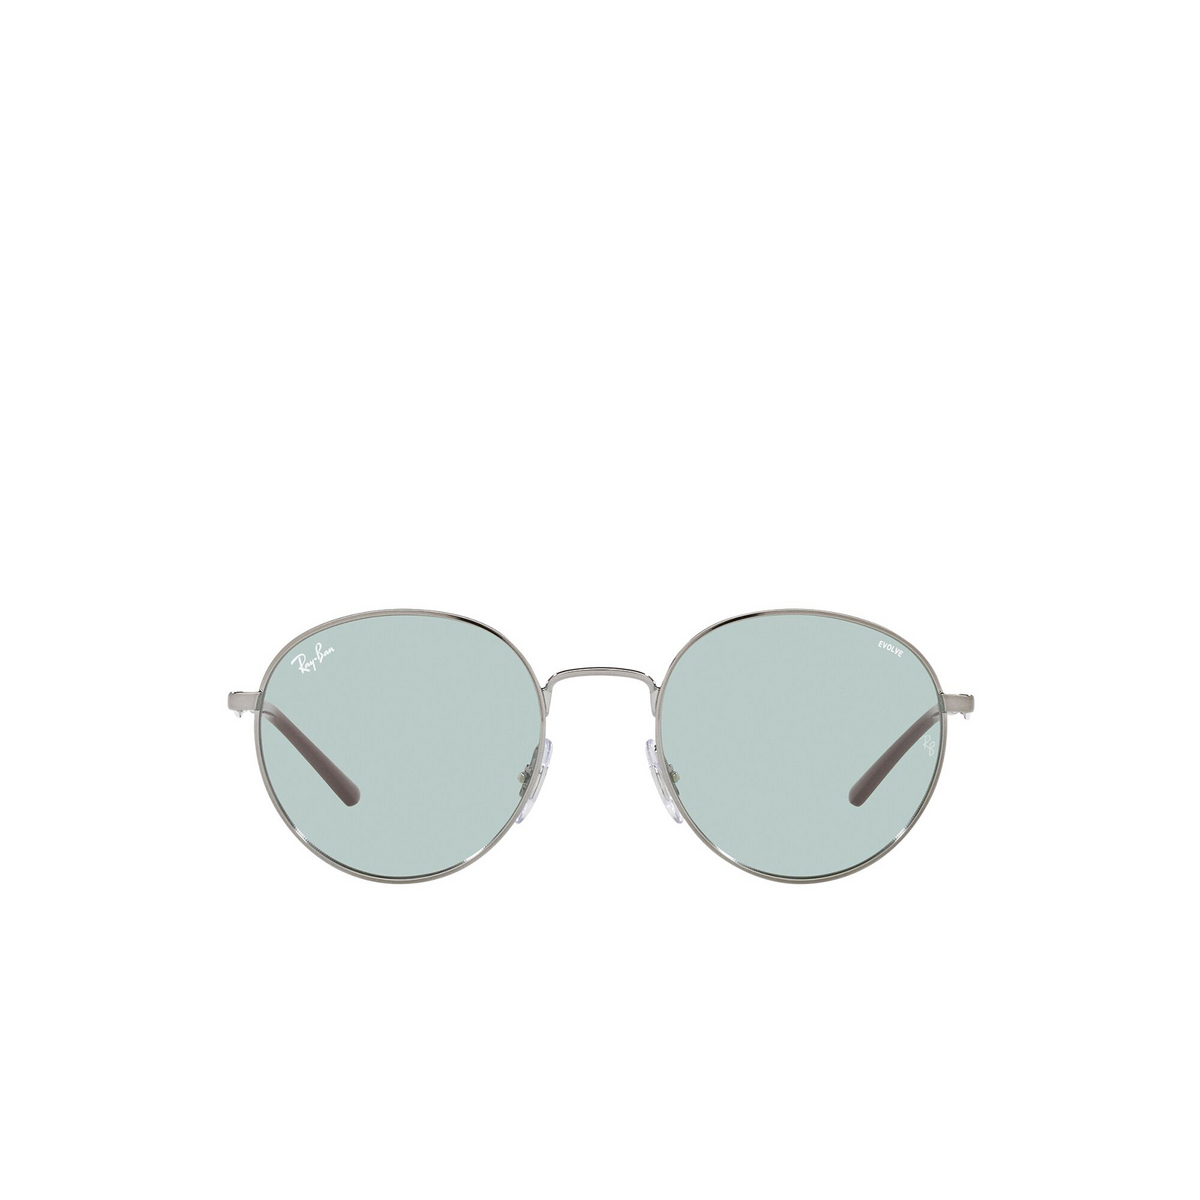 Ray-Ban® Round Sunglasses: RB3681 color Gunmetal 9226Q5 - front view.